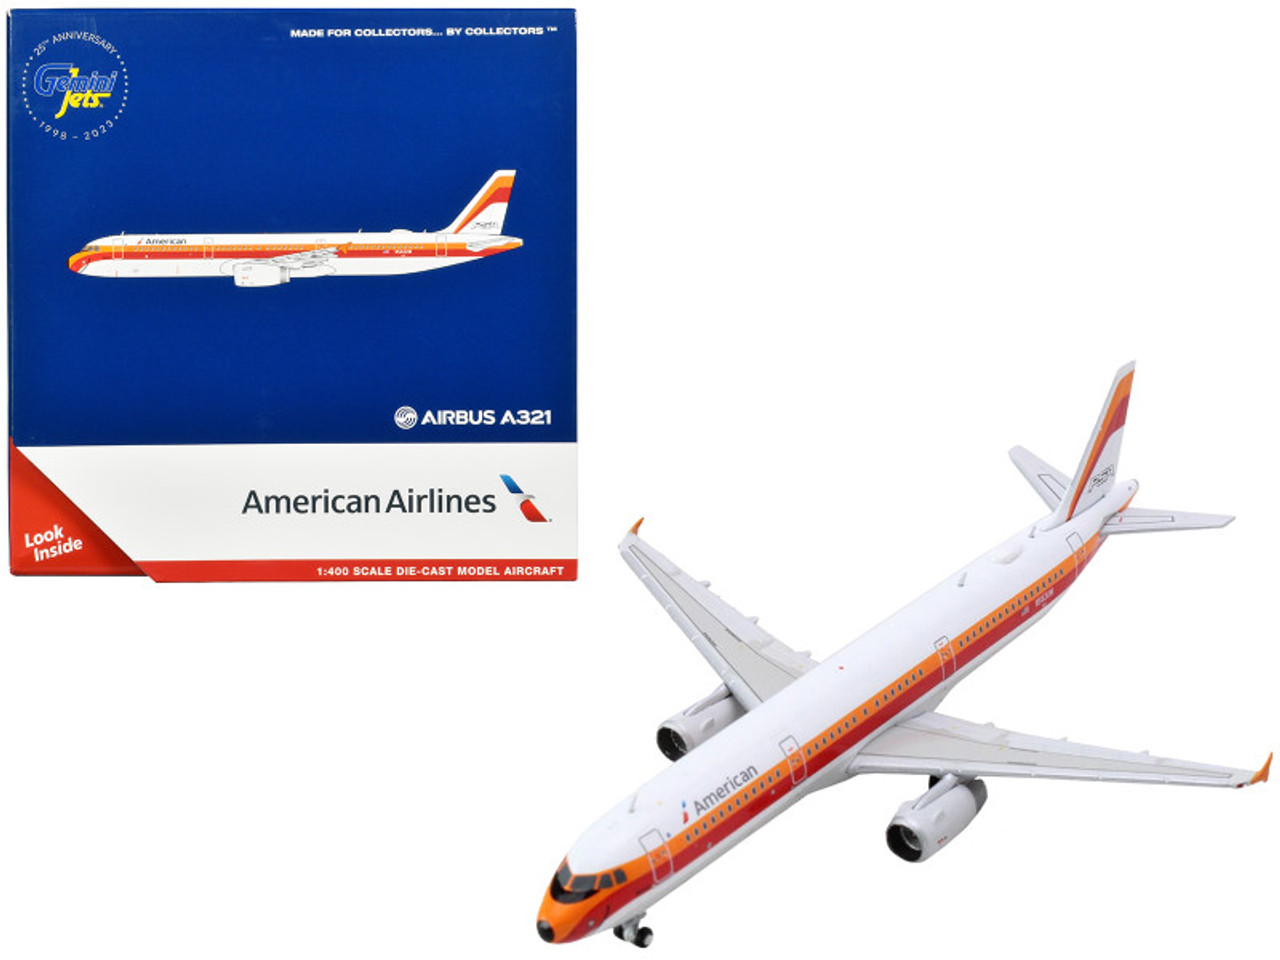 Airbus A321 Commercial Aircraft "American Airlines - PSA" (N582UW) White with Red and Orange Stripes 1/400 Diecast Model Airplane by GeminiJets